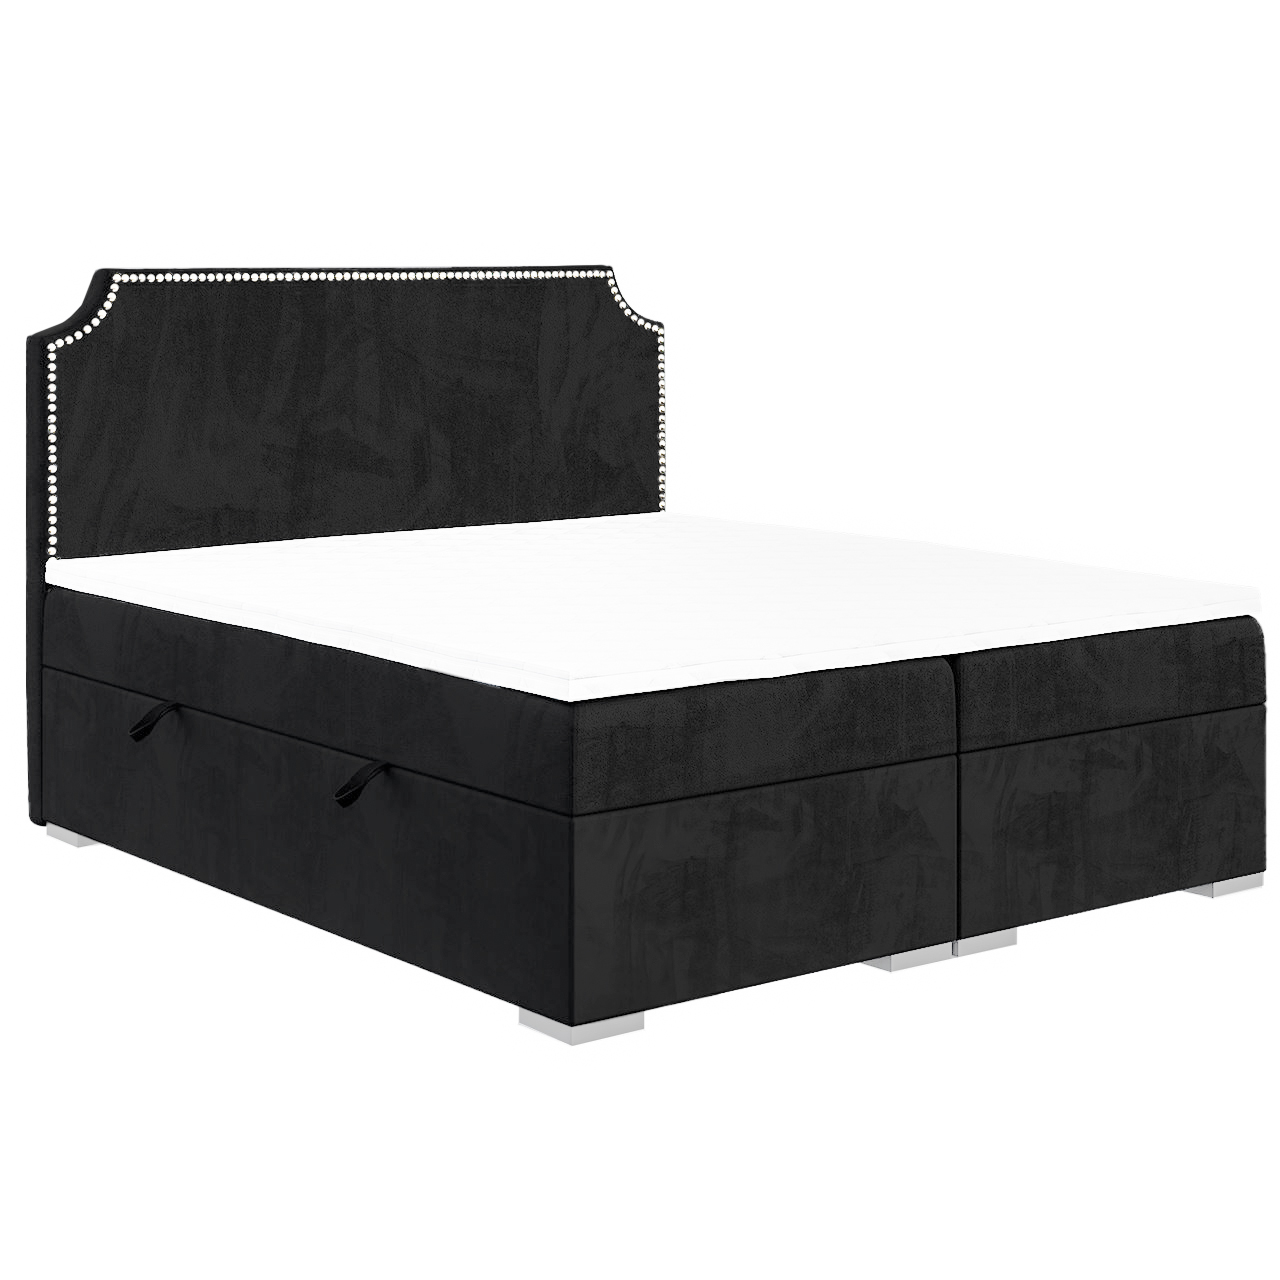 Upholstered bed LINA 140x200 riviera 100